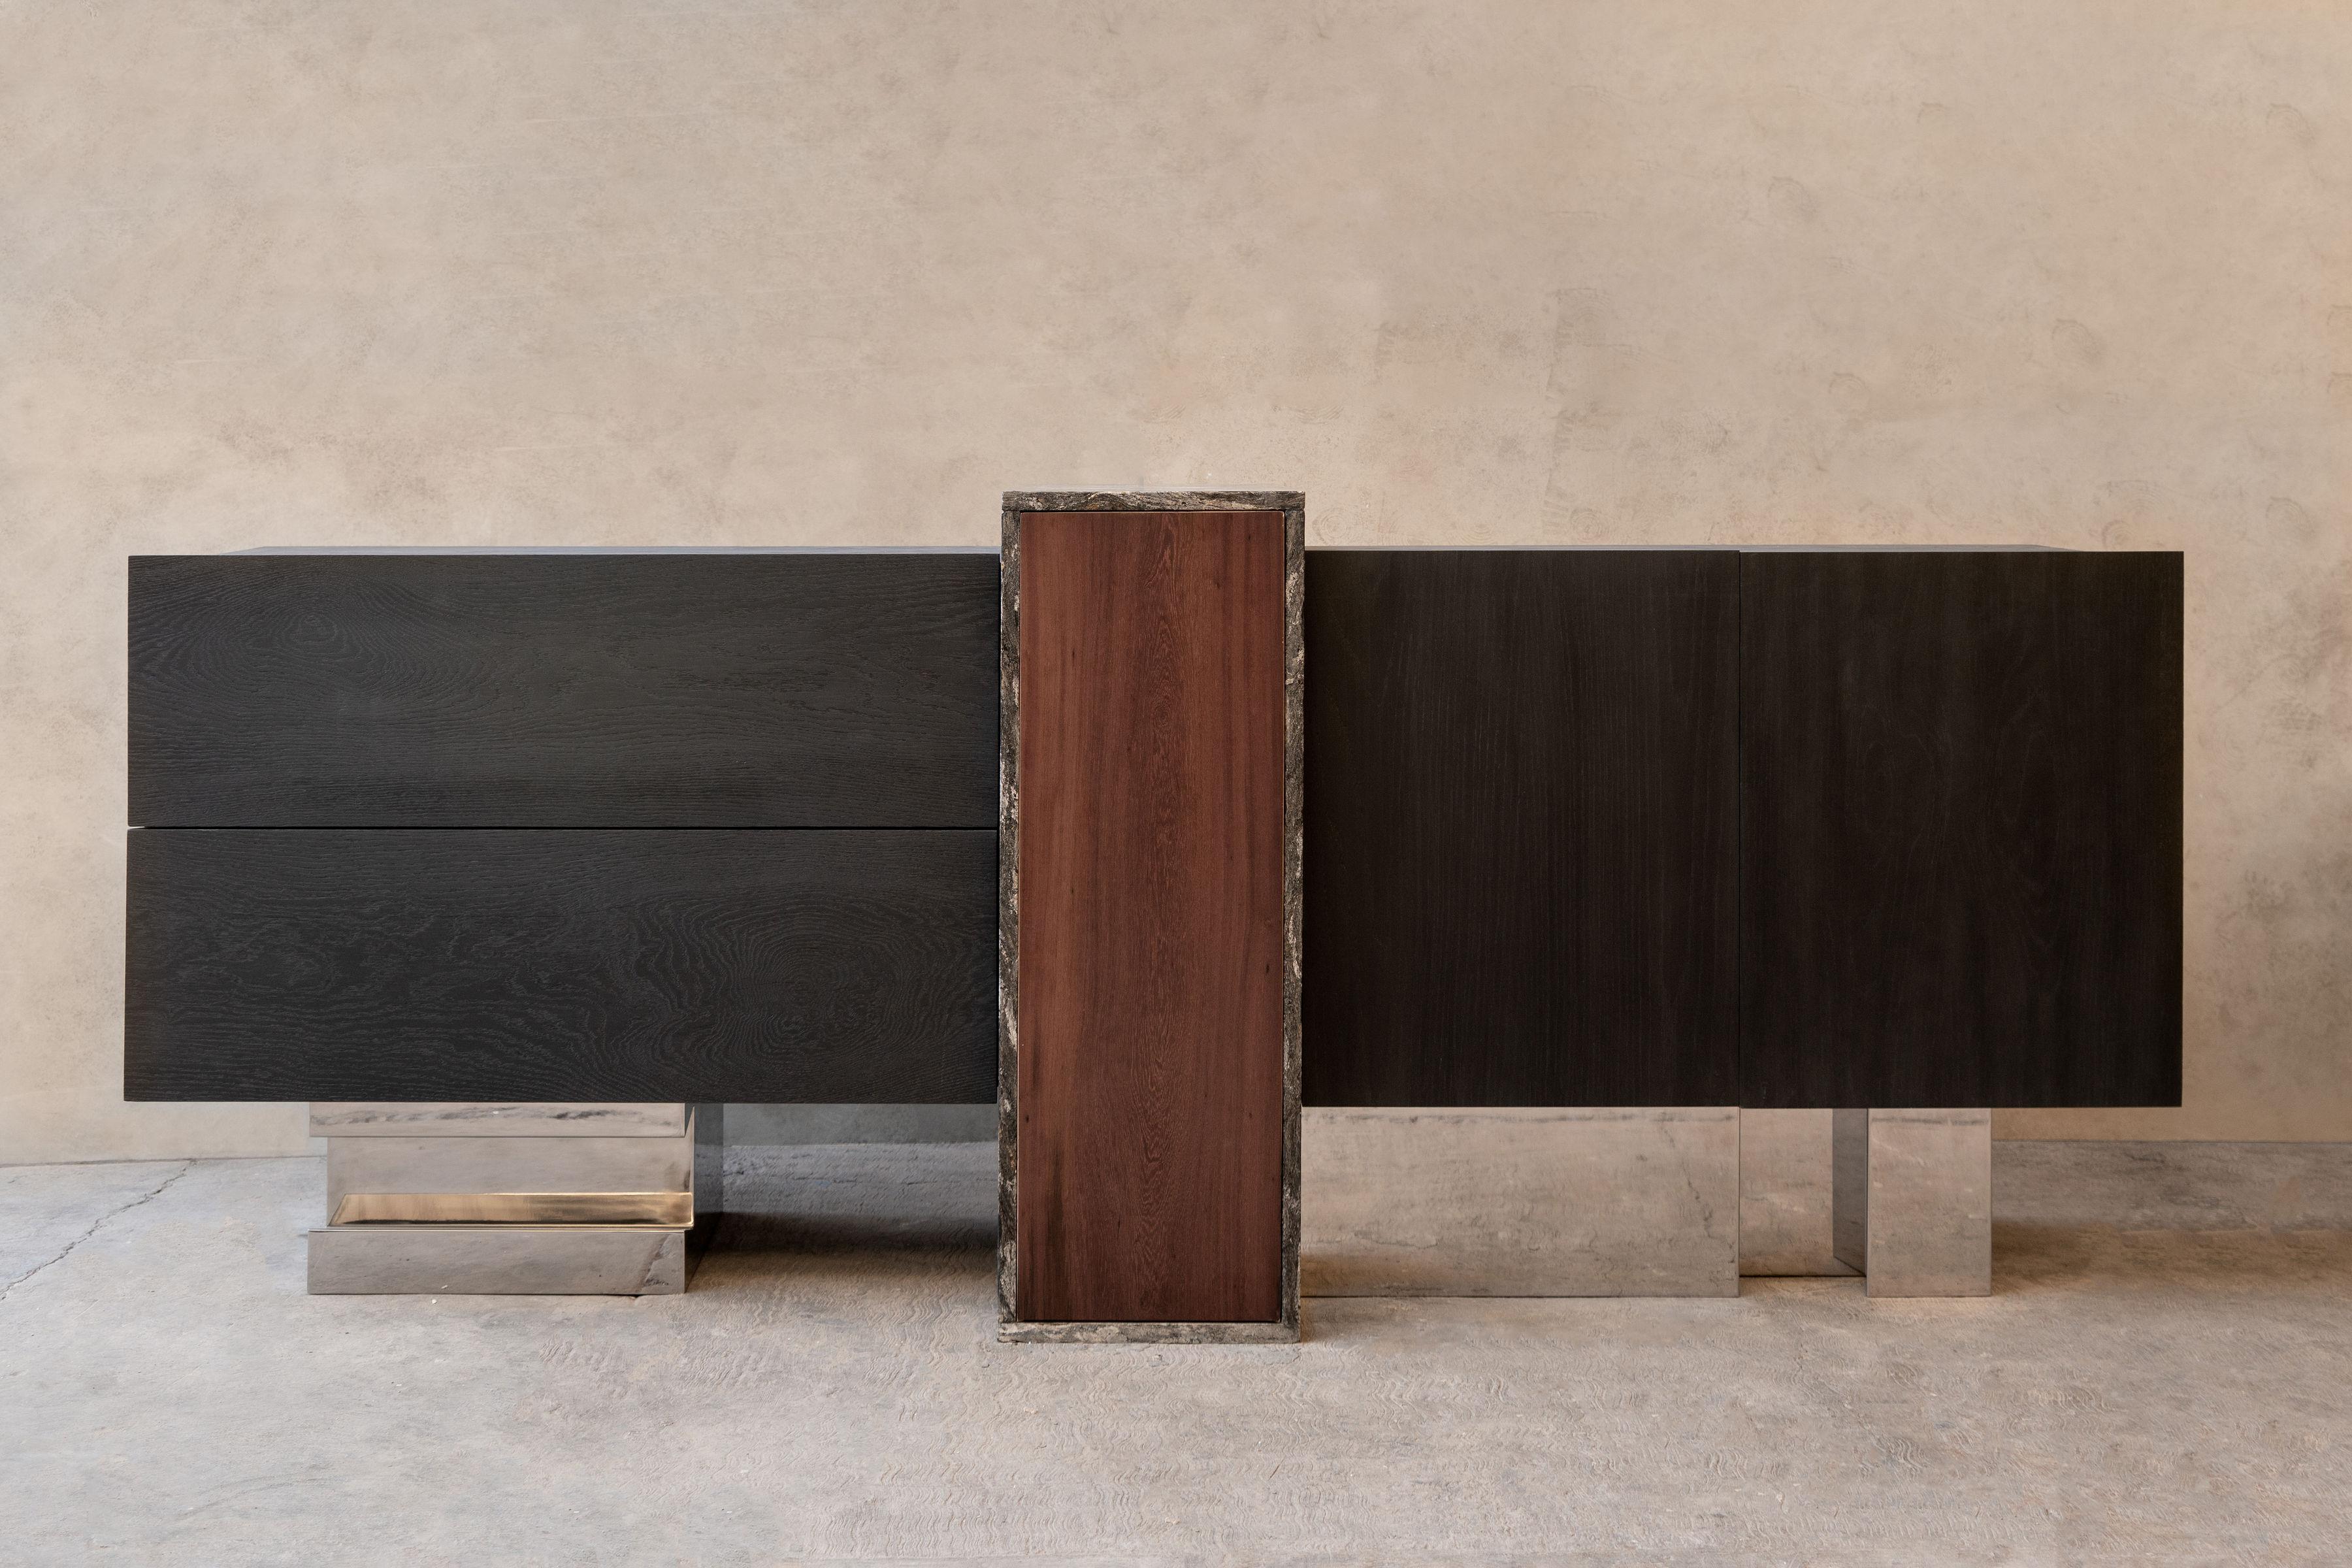 Greenwich console by Arturo Verástegui
Dimensions: D 300 x W 2.22 x H 75 cm
Materials: oak wood, Metalicus granite, Katalox wood, stainless steel.

Console made of burnt white oak, Metalicus granite, Katalox wood and stainless steel.

Arturo